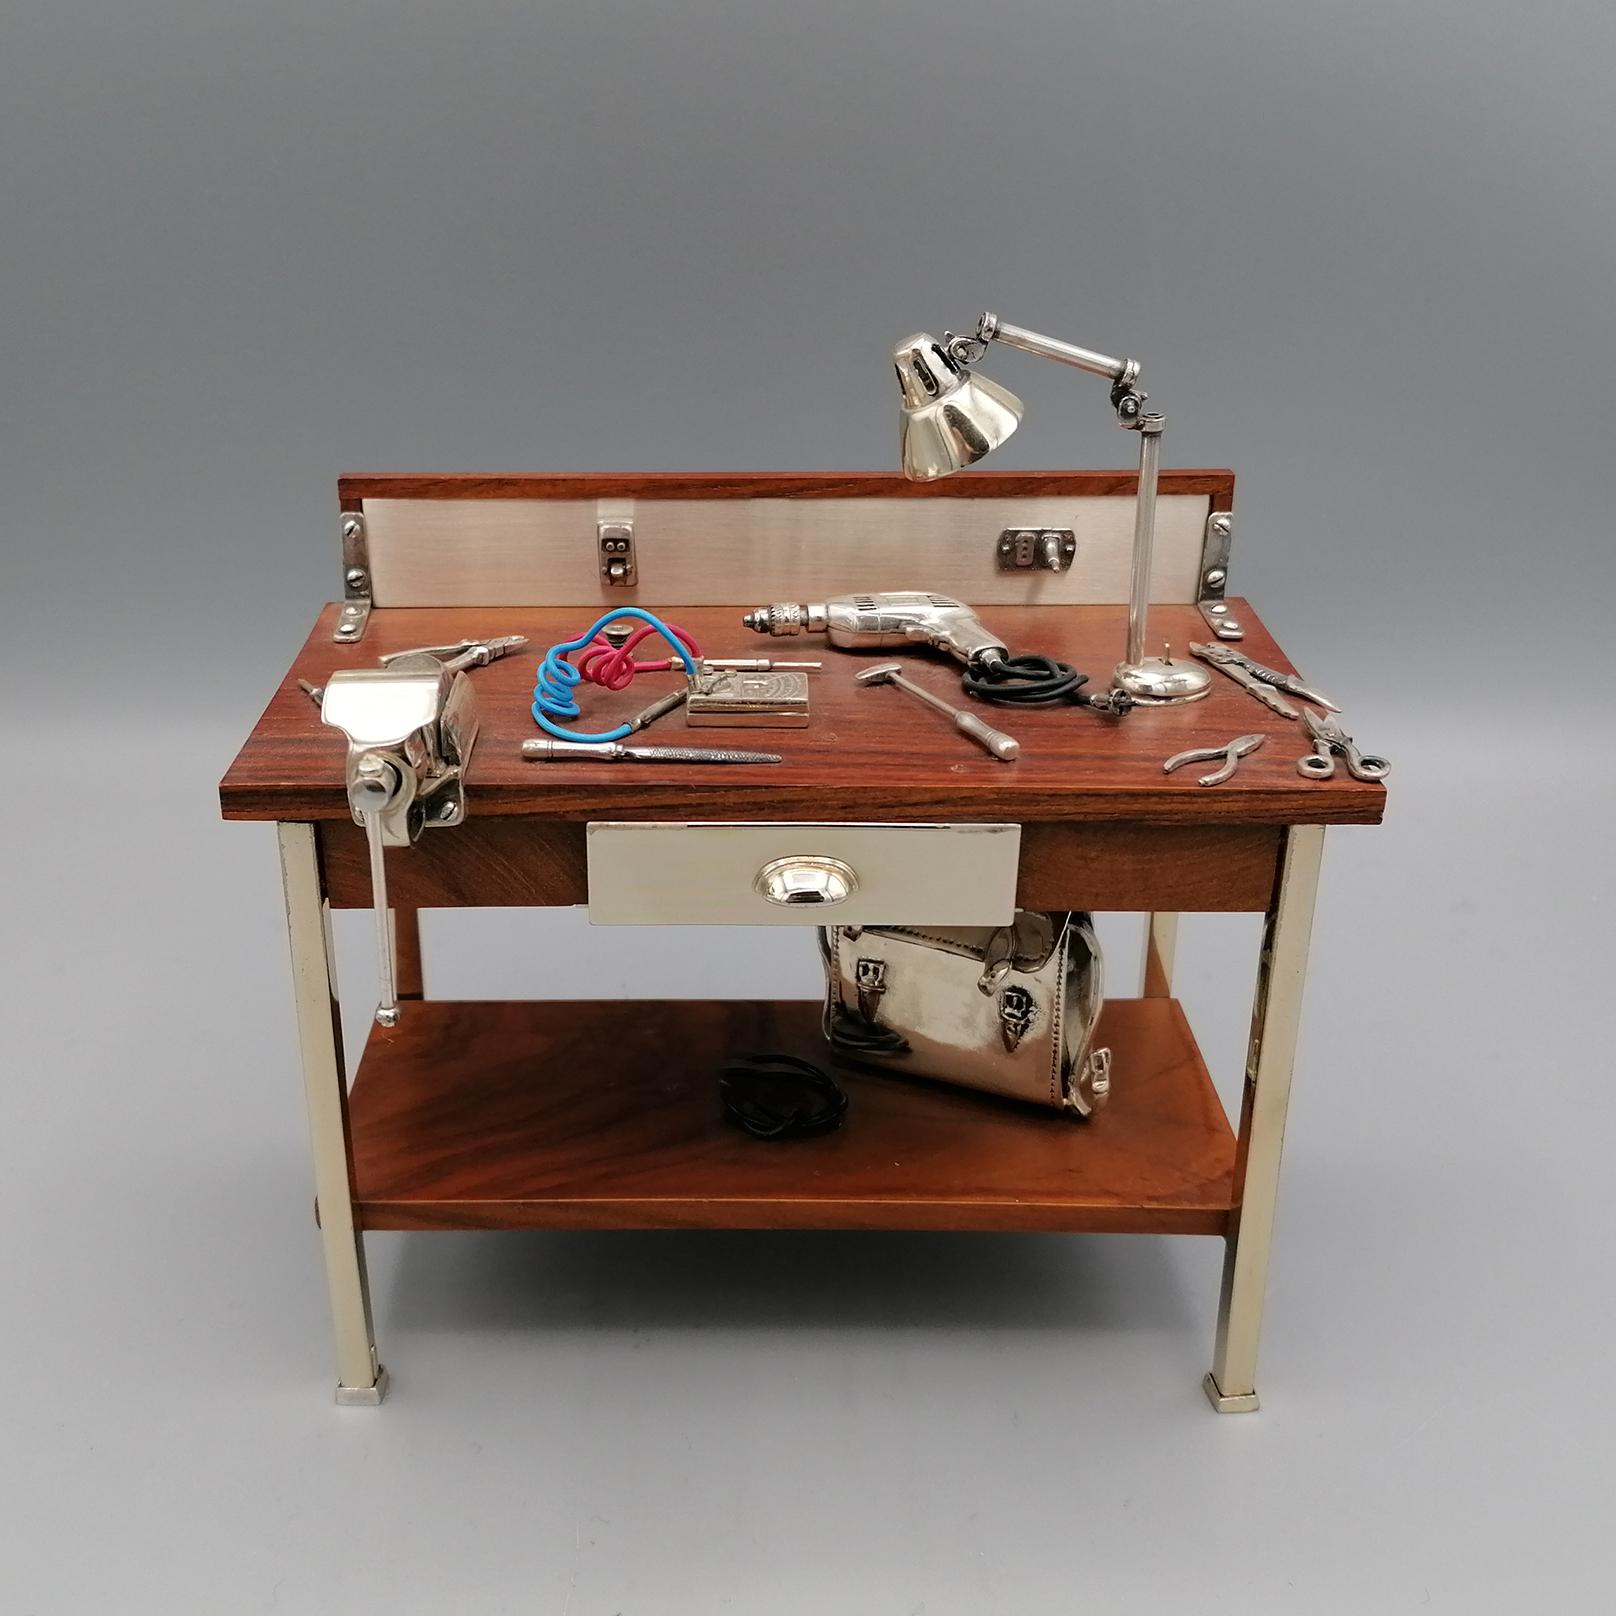 Electrician's workbench in wood and silver.
This miniature that reproduces the electrician's workbench was made in Arezzo - Tuscany - Italy by the master silversmith Sacchetti, specialized in the creation of silver miniatures.
The workbench is in